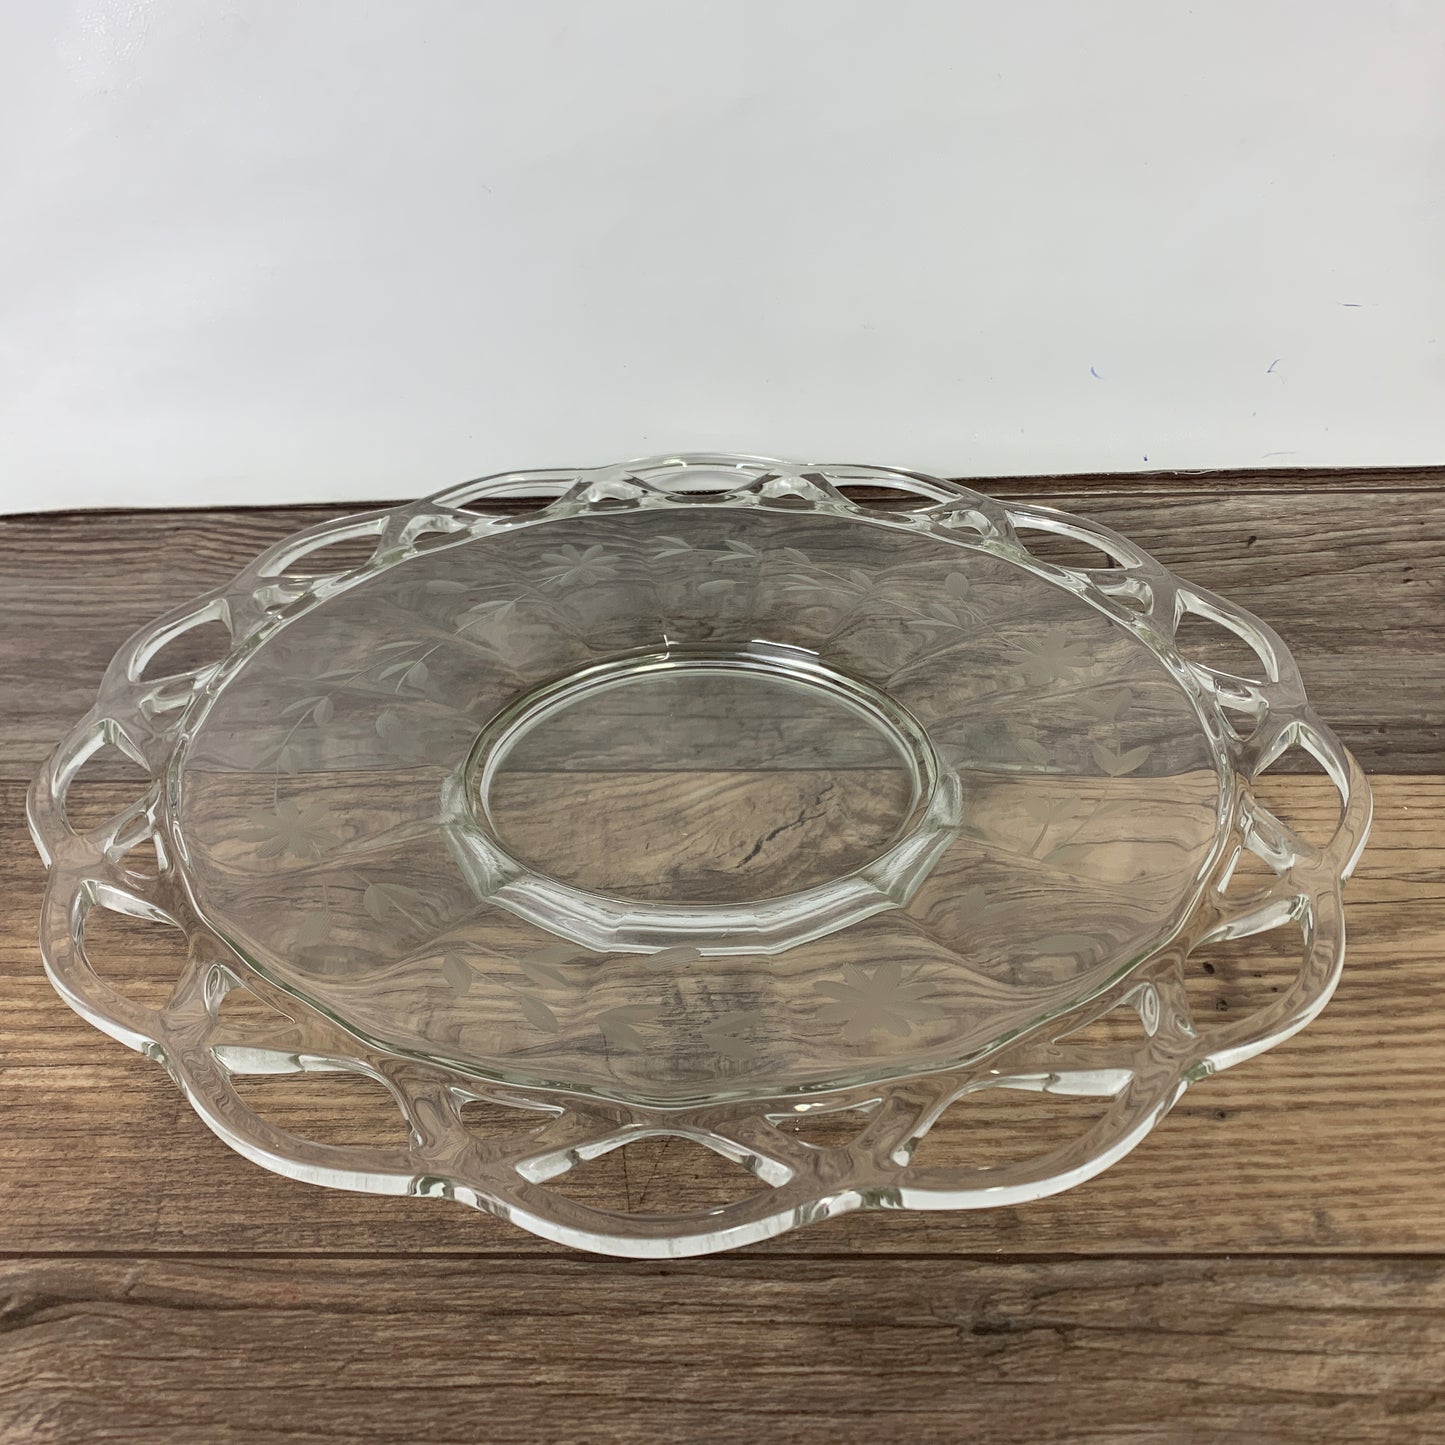 Laced Edge Glass Platter with Etched Floral Design